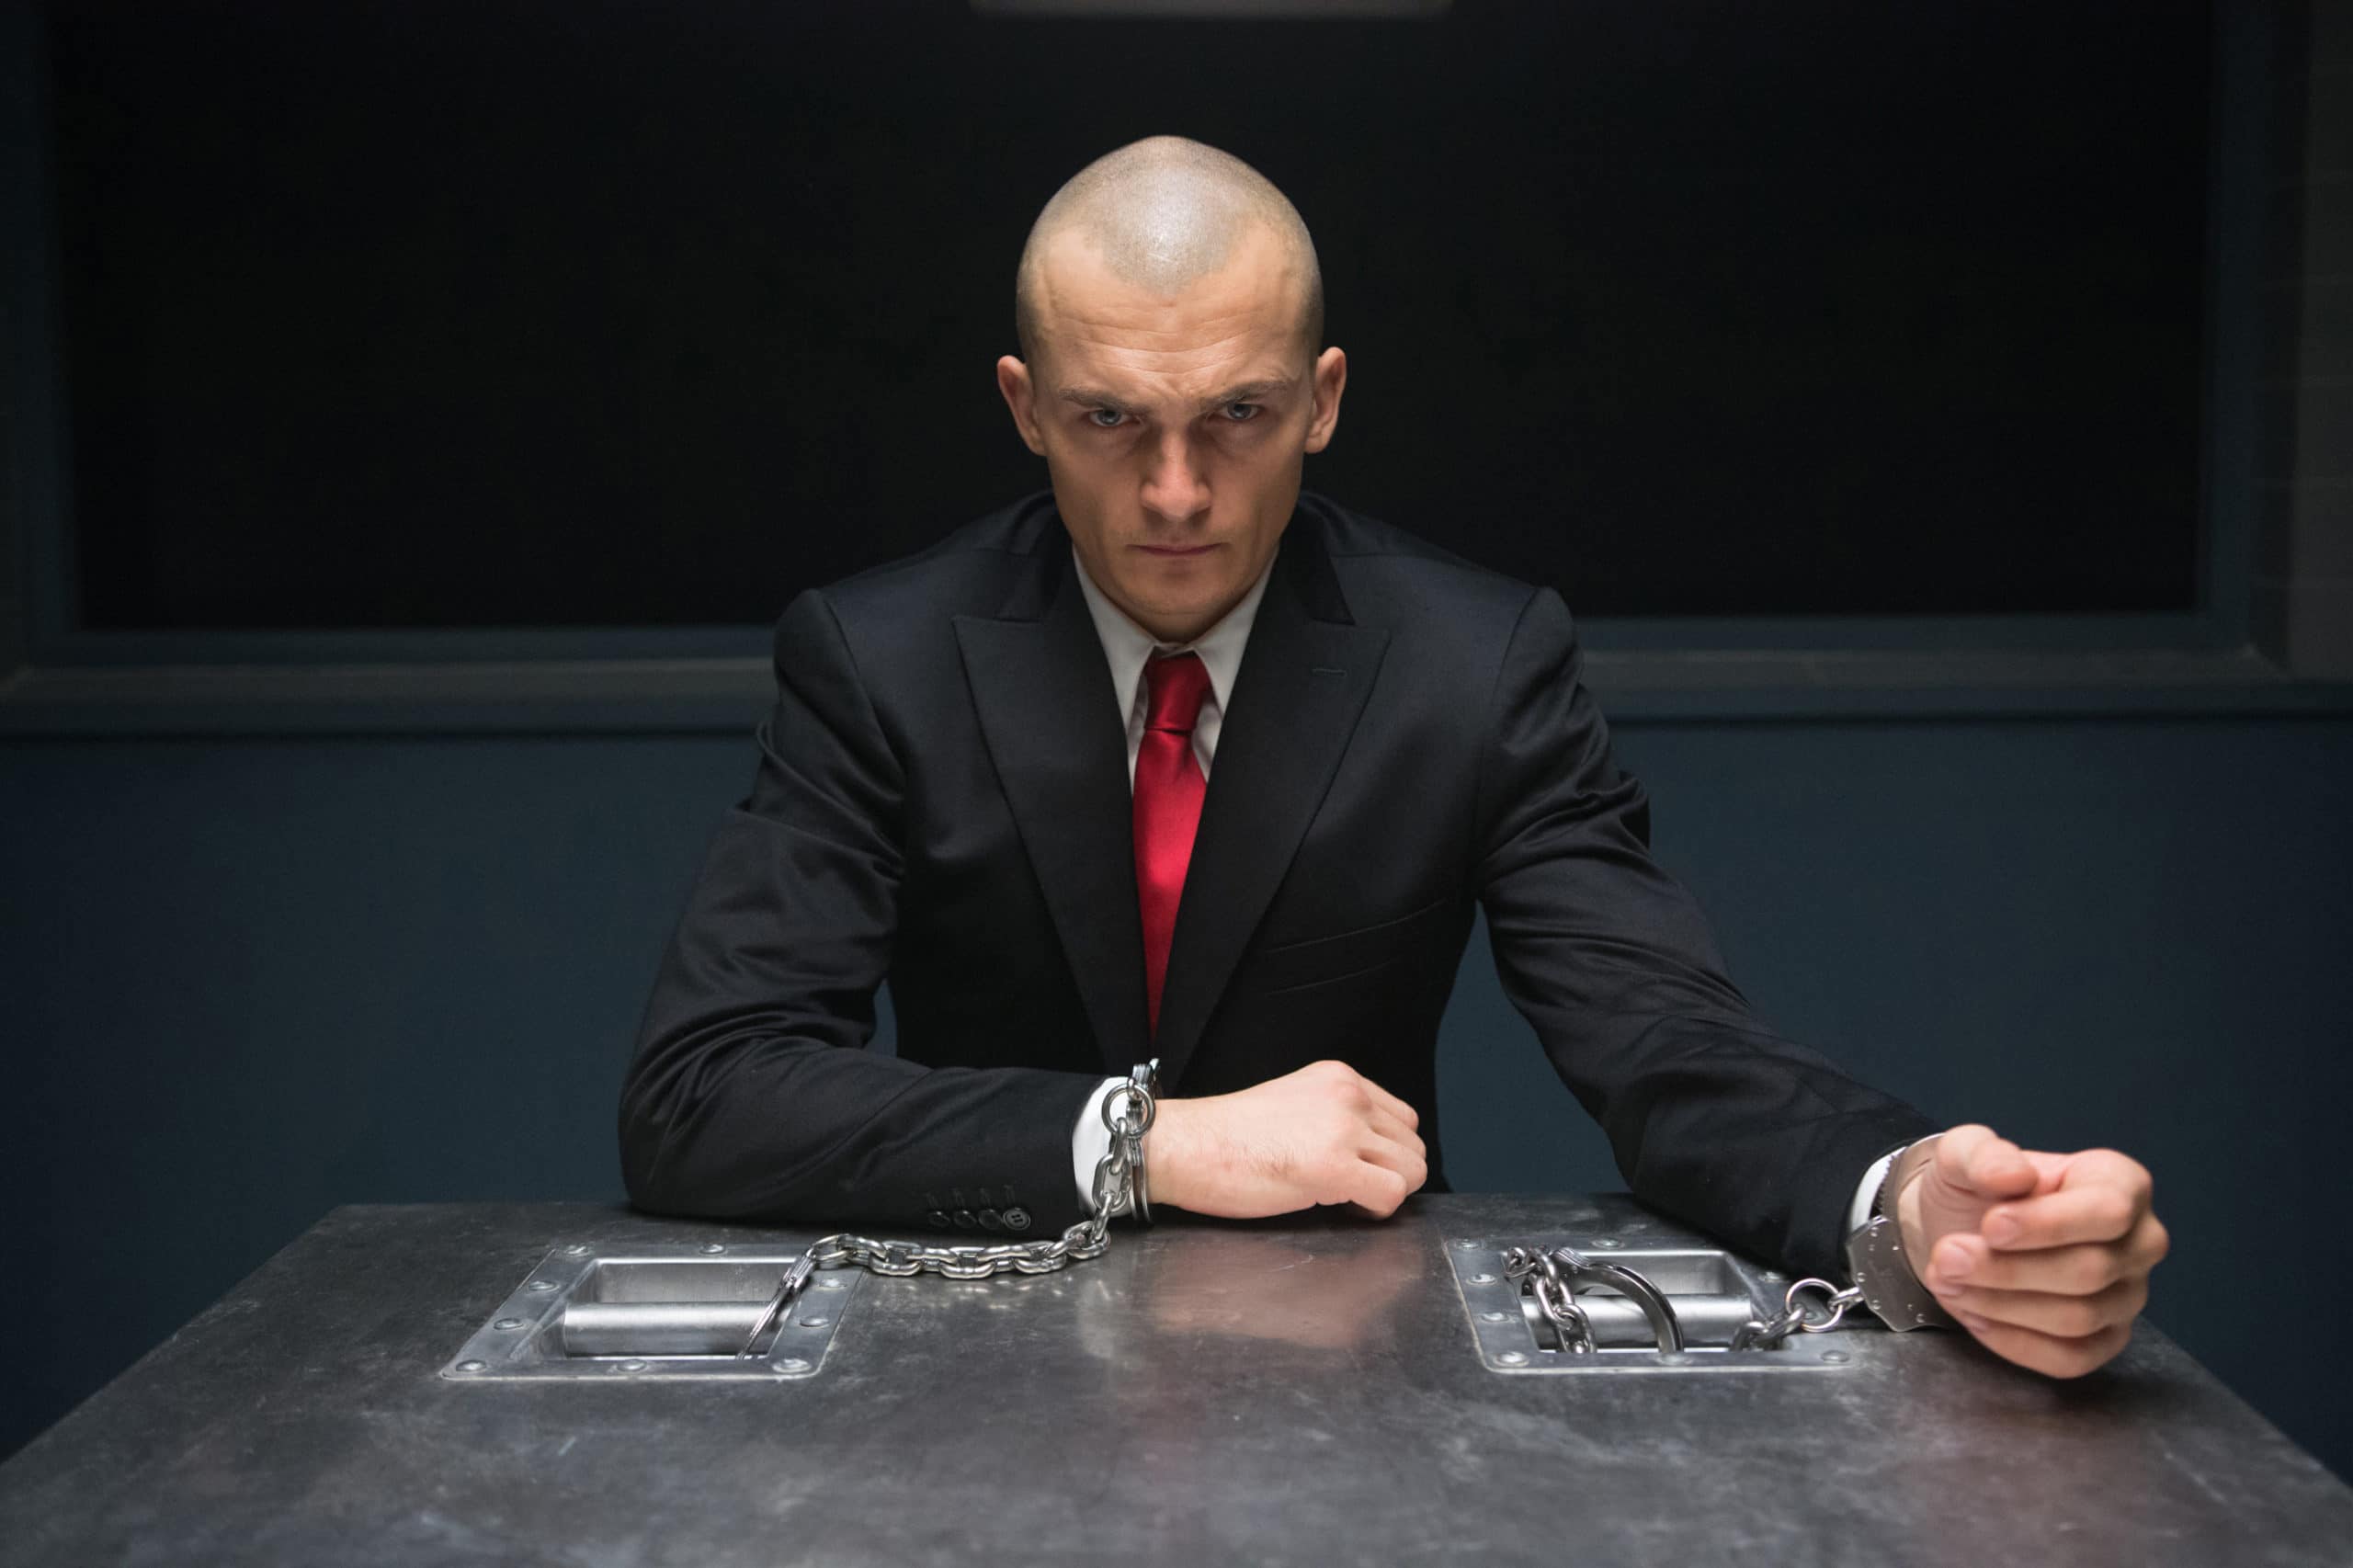 Rupert Friend in Hitman: Agent 47 - Photo provided by costume designer Bina Daigeler - Photo Credit: Reiner Bajo//R.Bajo - © TM and © 2014 Twentieth Century Fox Film Corporation. All rights reserved. Not for sale or duplication.